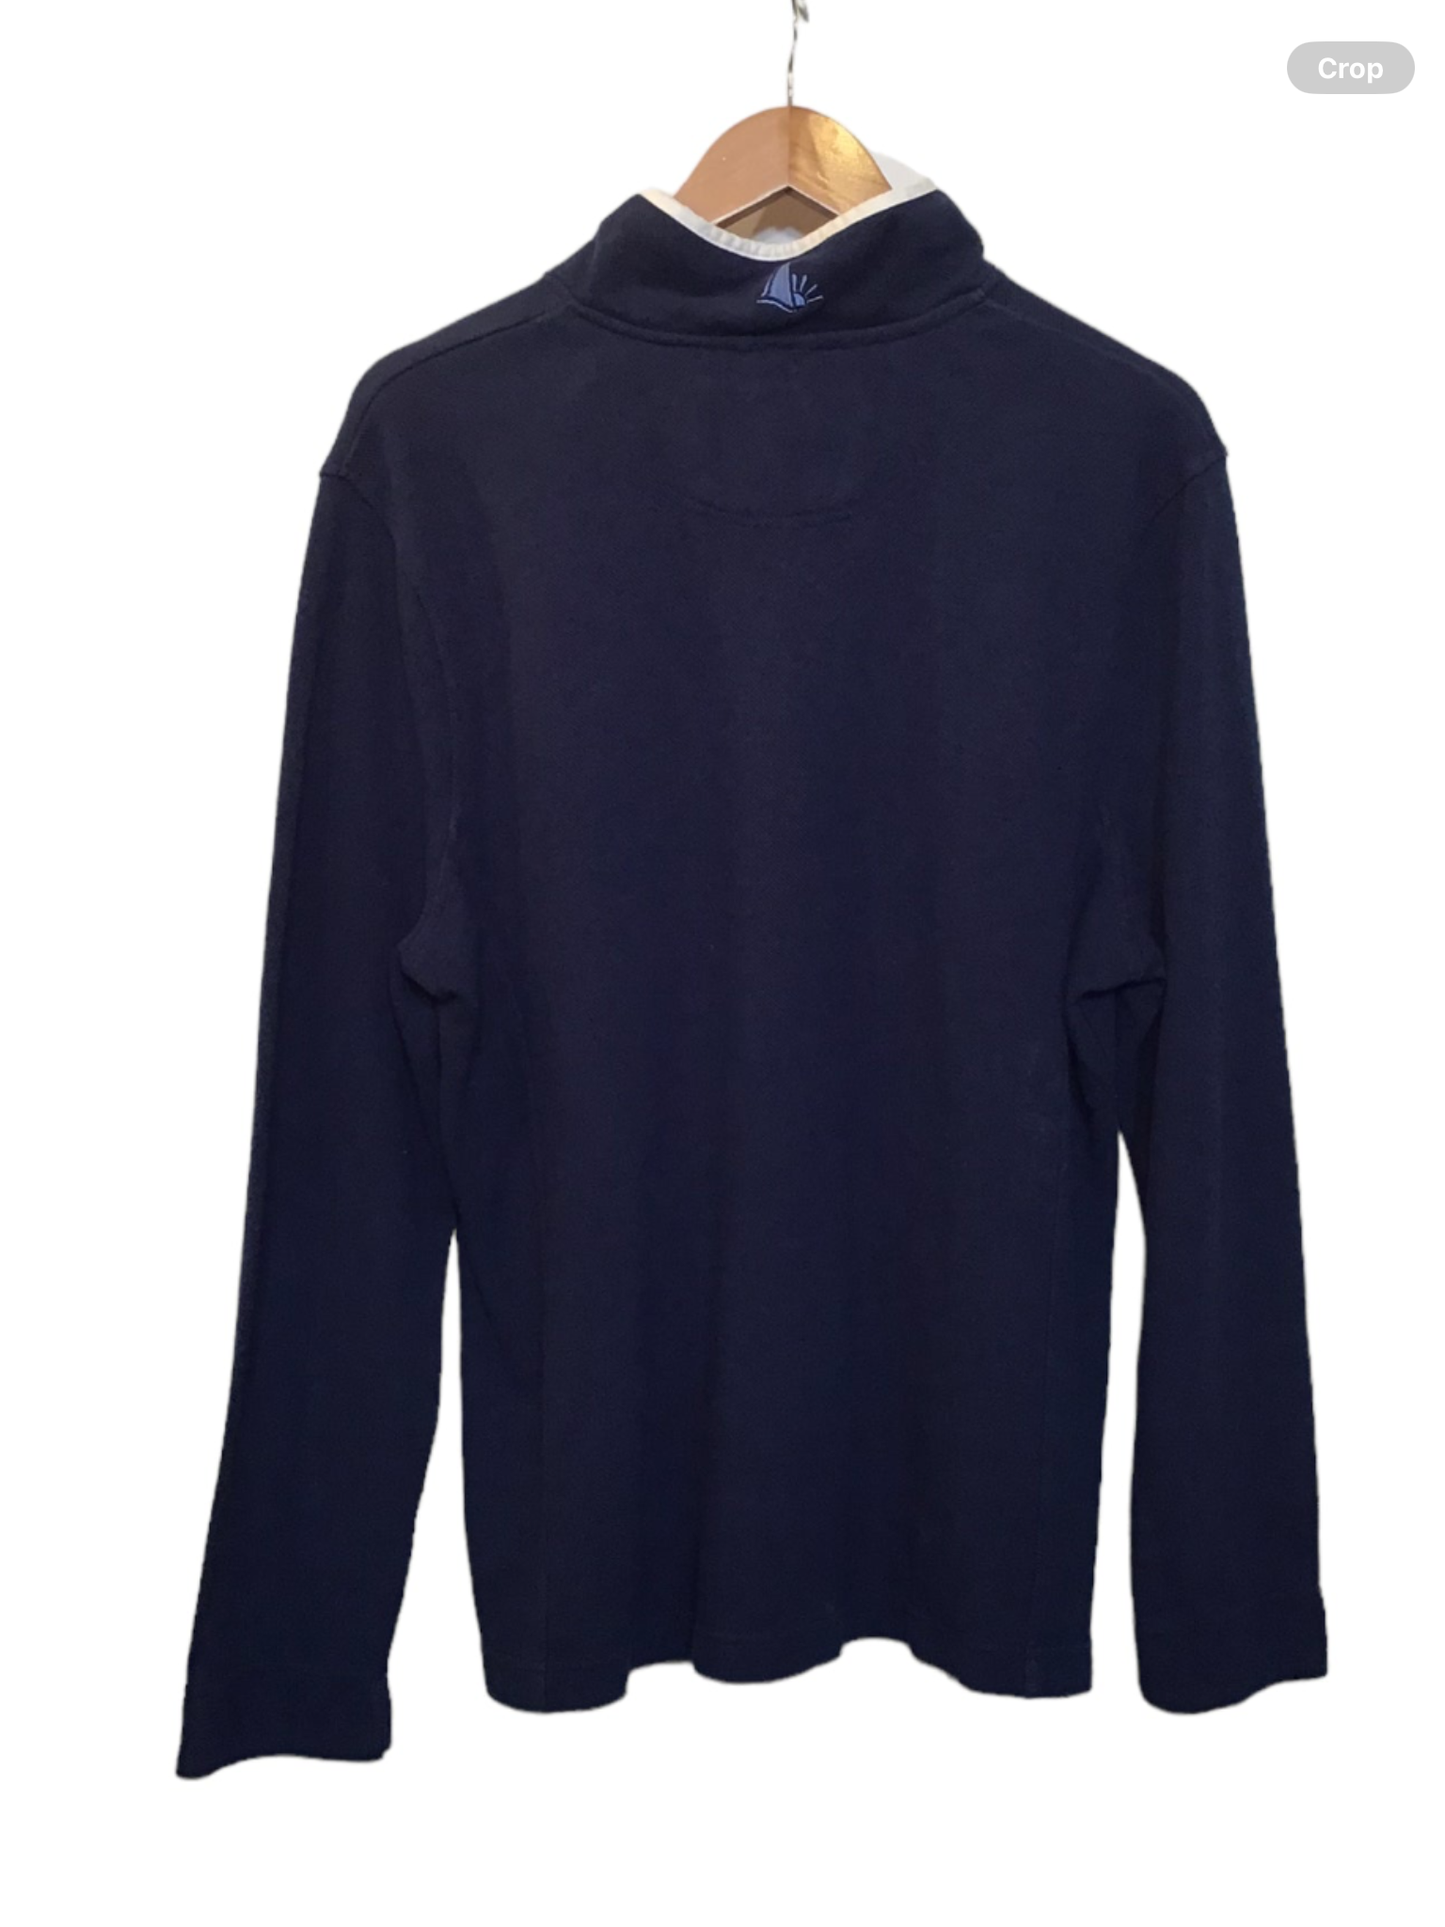 Dock of the Bay Long Sleeved Top (Size L)